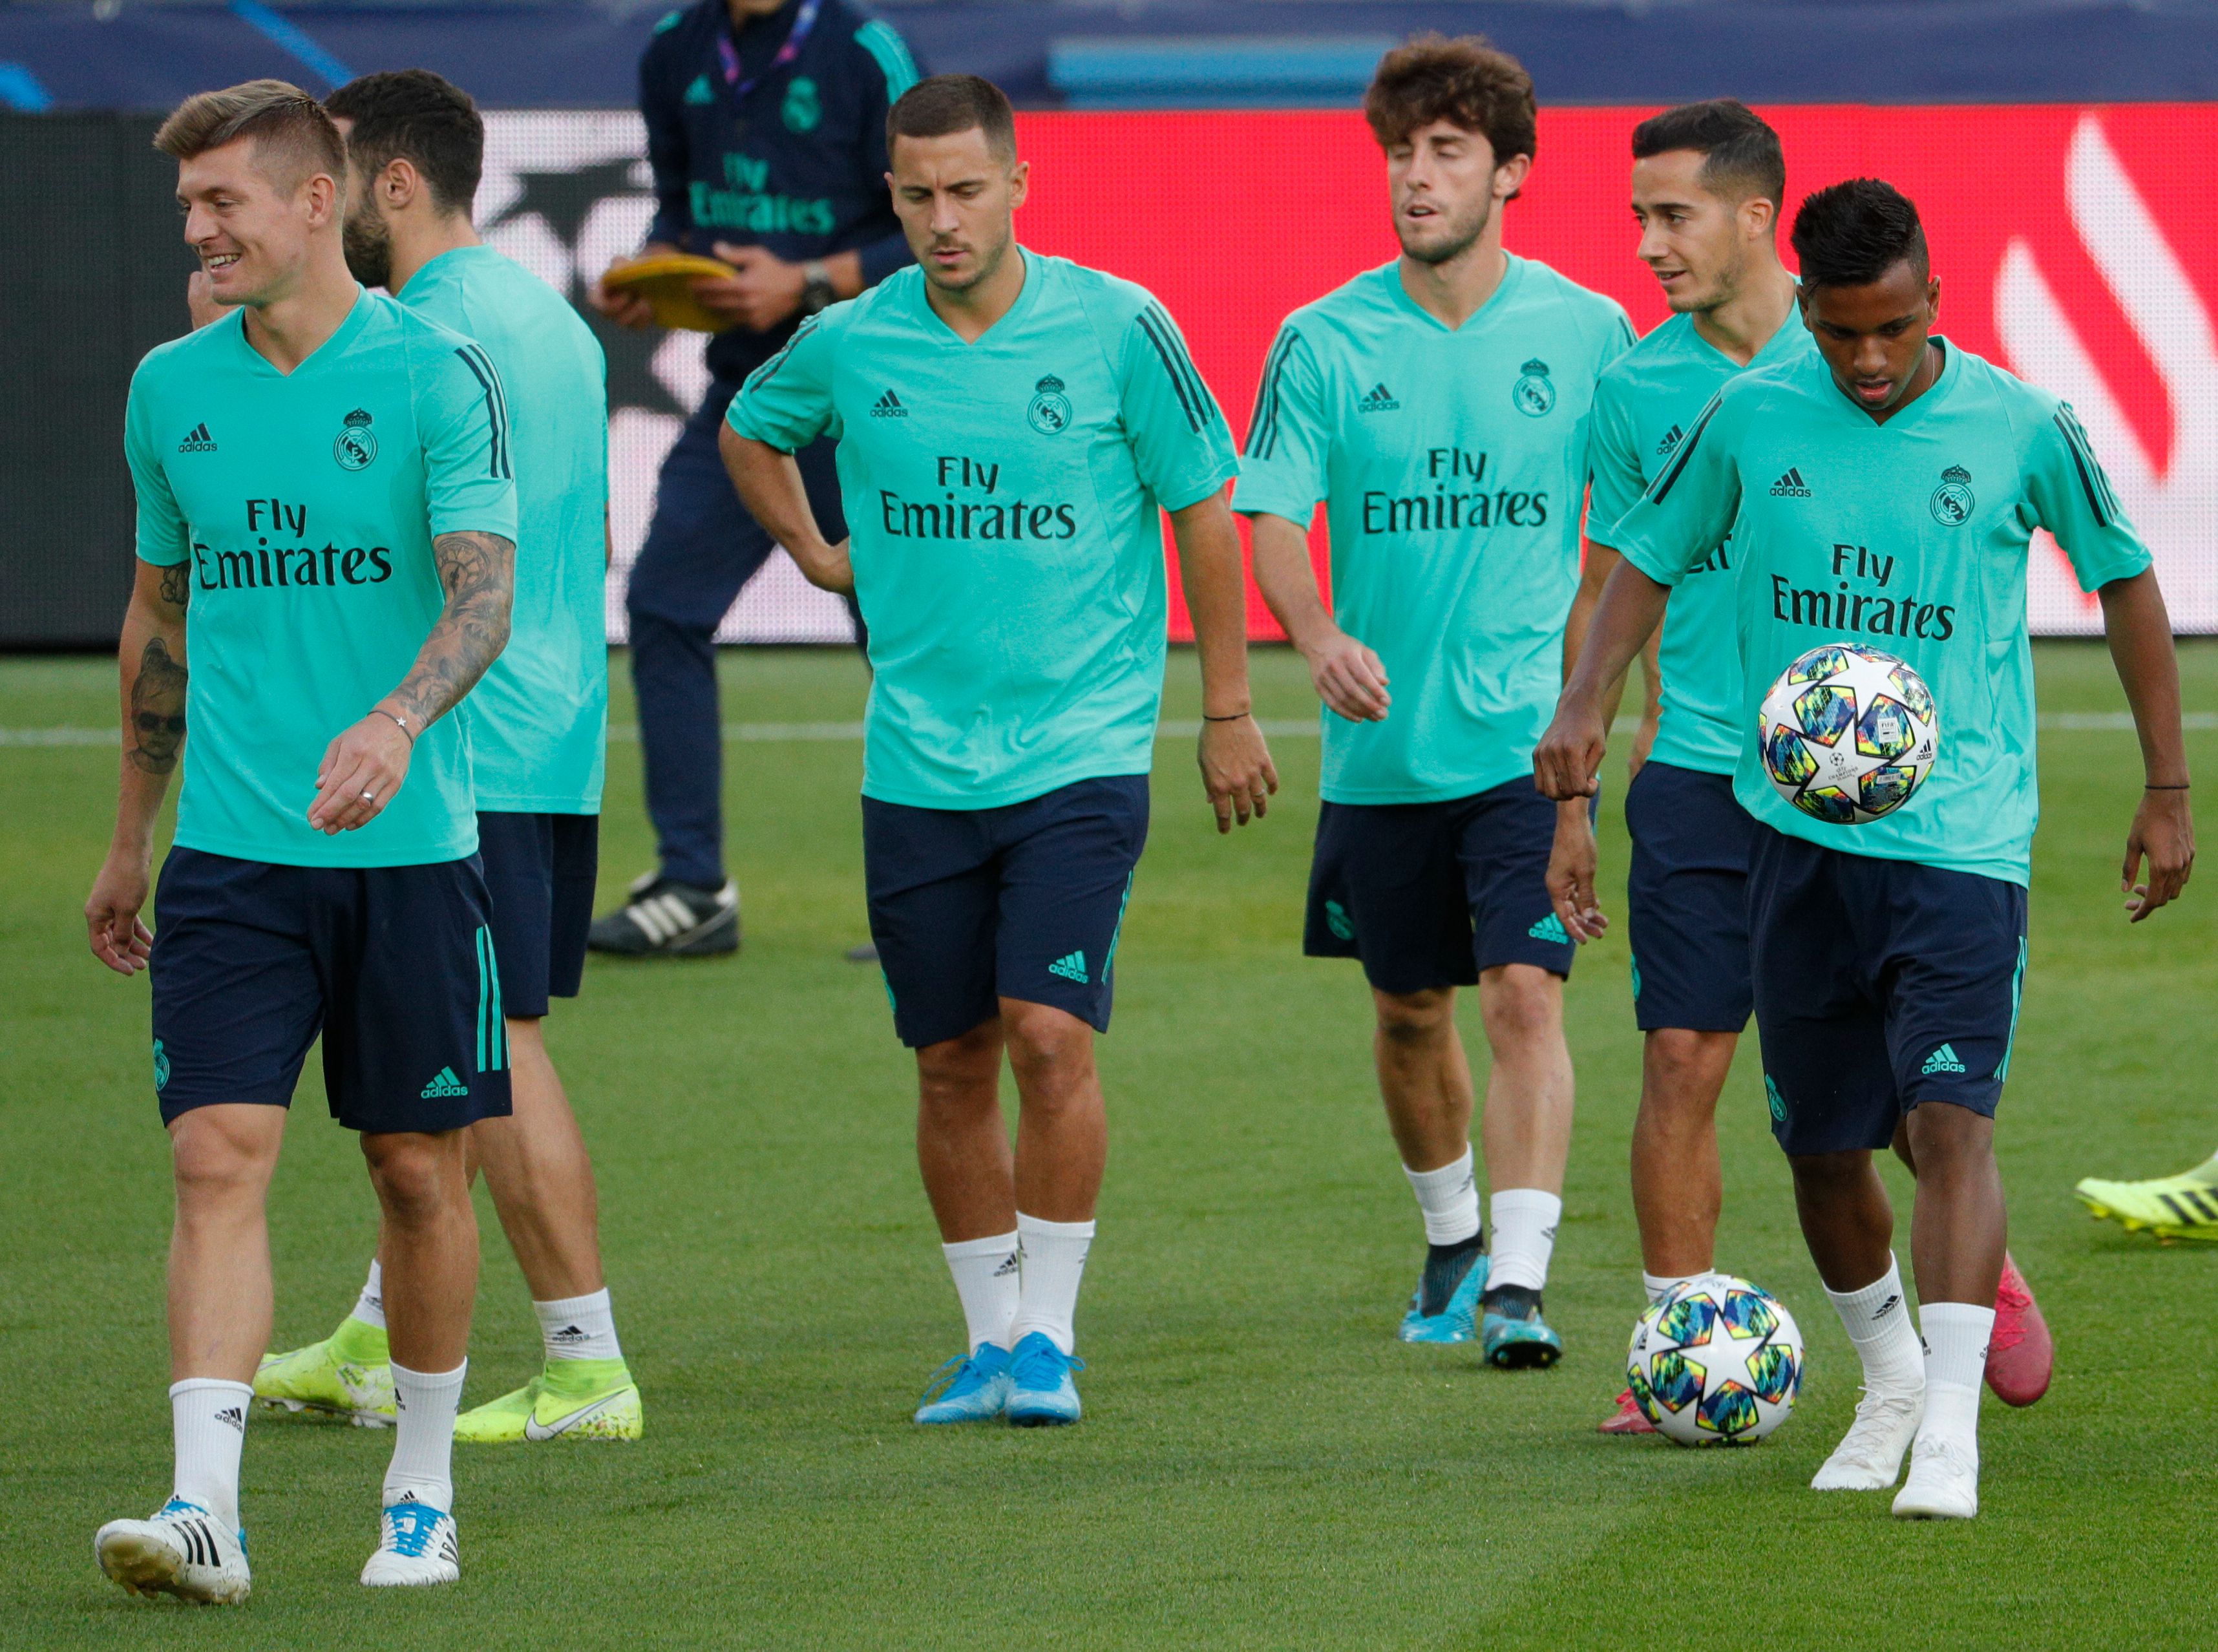 (From L) Real Madrid's German midfielder Toni Kroos, Real Madrid's Belgian forward Eden Hazard, Real Madrid's Spanish defender Alvaro Odriozola, Real Madrid's Spanish forward Lucas Vazquez and Real Madrid's Brazilian forward Vinicius Junior attend a training session on the eve of the UEFA Champions League Group A football match between Paris Saint-Germain and Real Madrid CF at the Parc des Princes stadium in Paris on September 17, 2019. (Photo by GEOFFROY VAN DER HASSELT / AFP)        (Photo credit should read GEOFFROY VAN DER HASSELT/AFP/Getty Images)